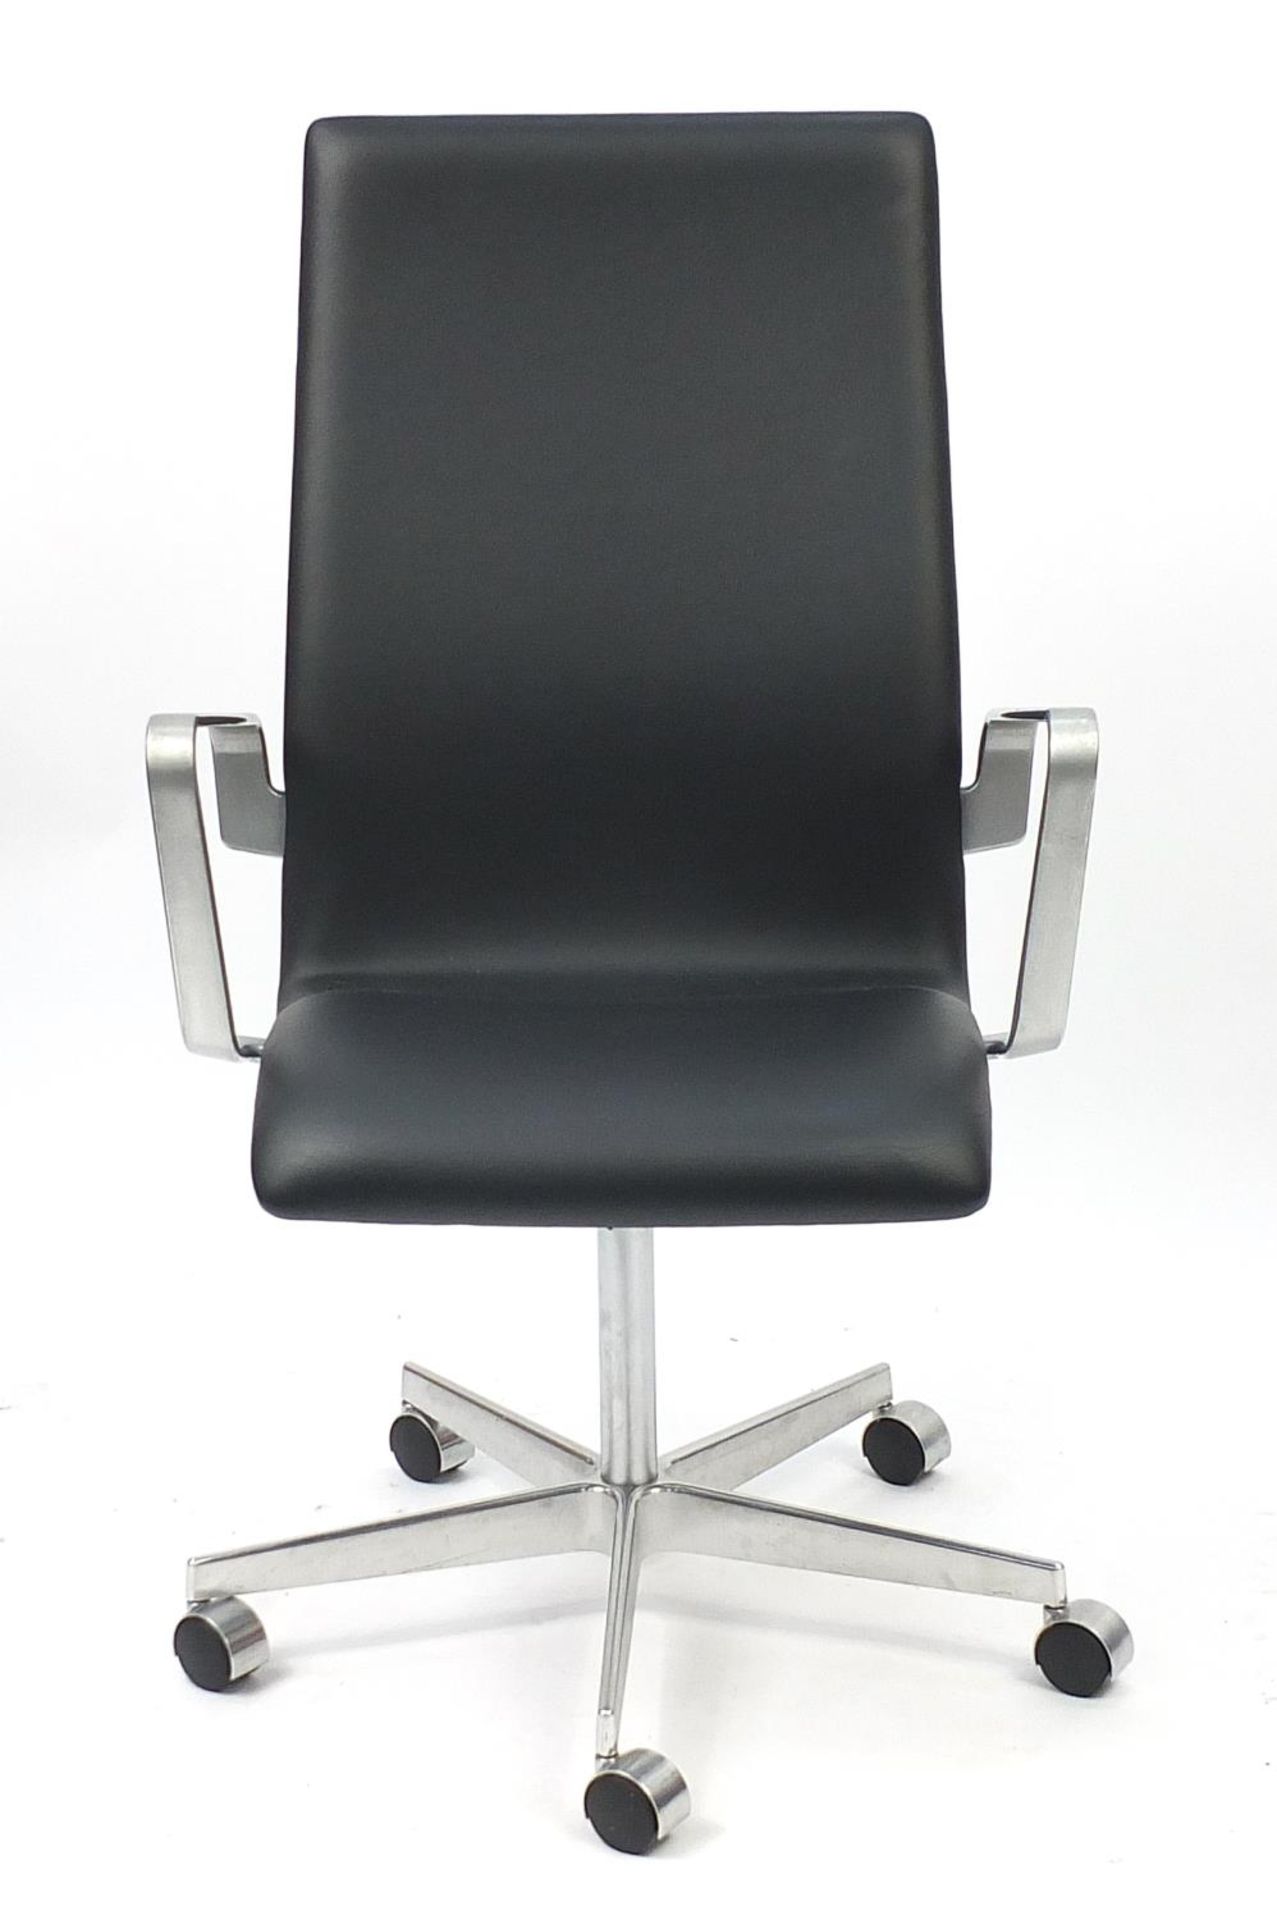 Arne Jacobsen for Fritz Hansen, 3273C Oxford armchair, 105cm high (OPTION) : For Further Condition - Image 2 of 5